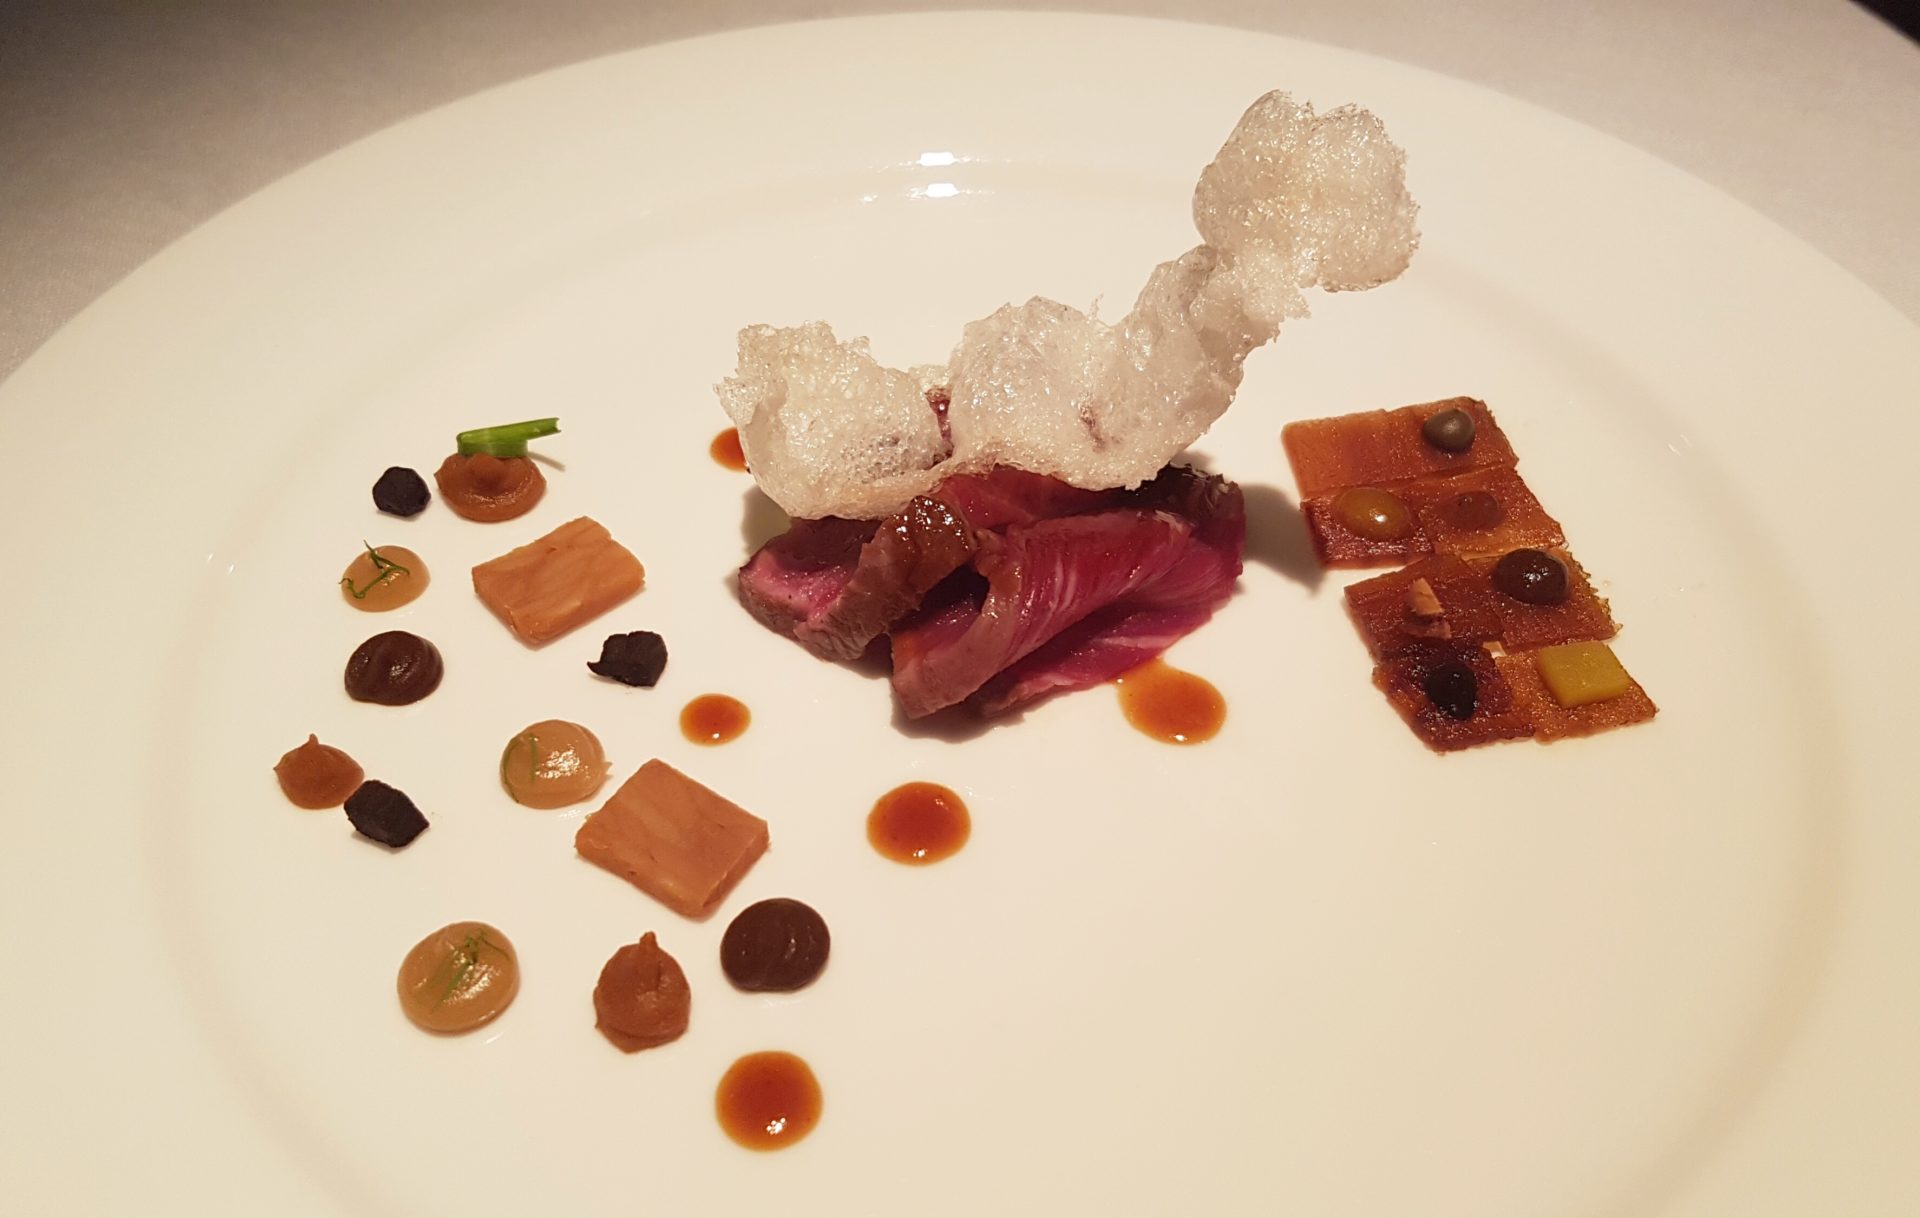 Picture of Macallan Whisky tenderloin from the menu served in London during the BBVA Roca Tour 16